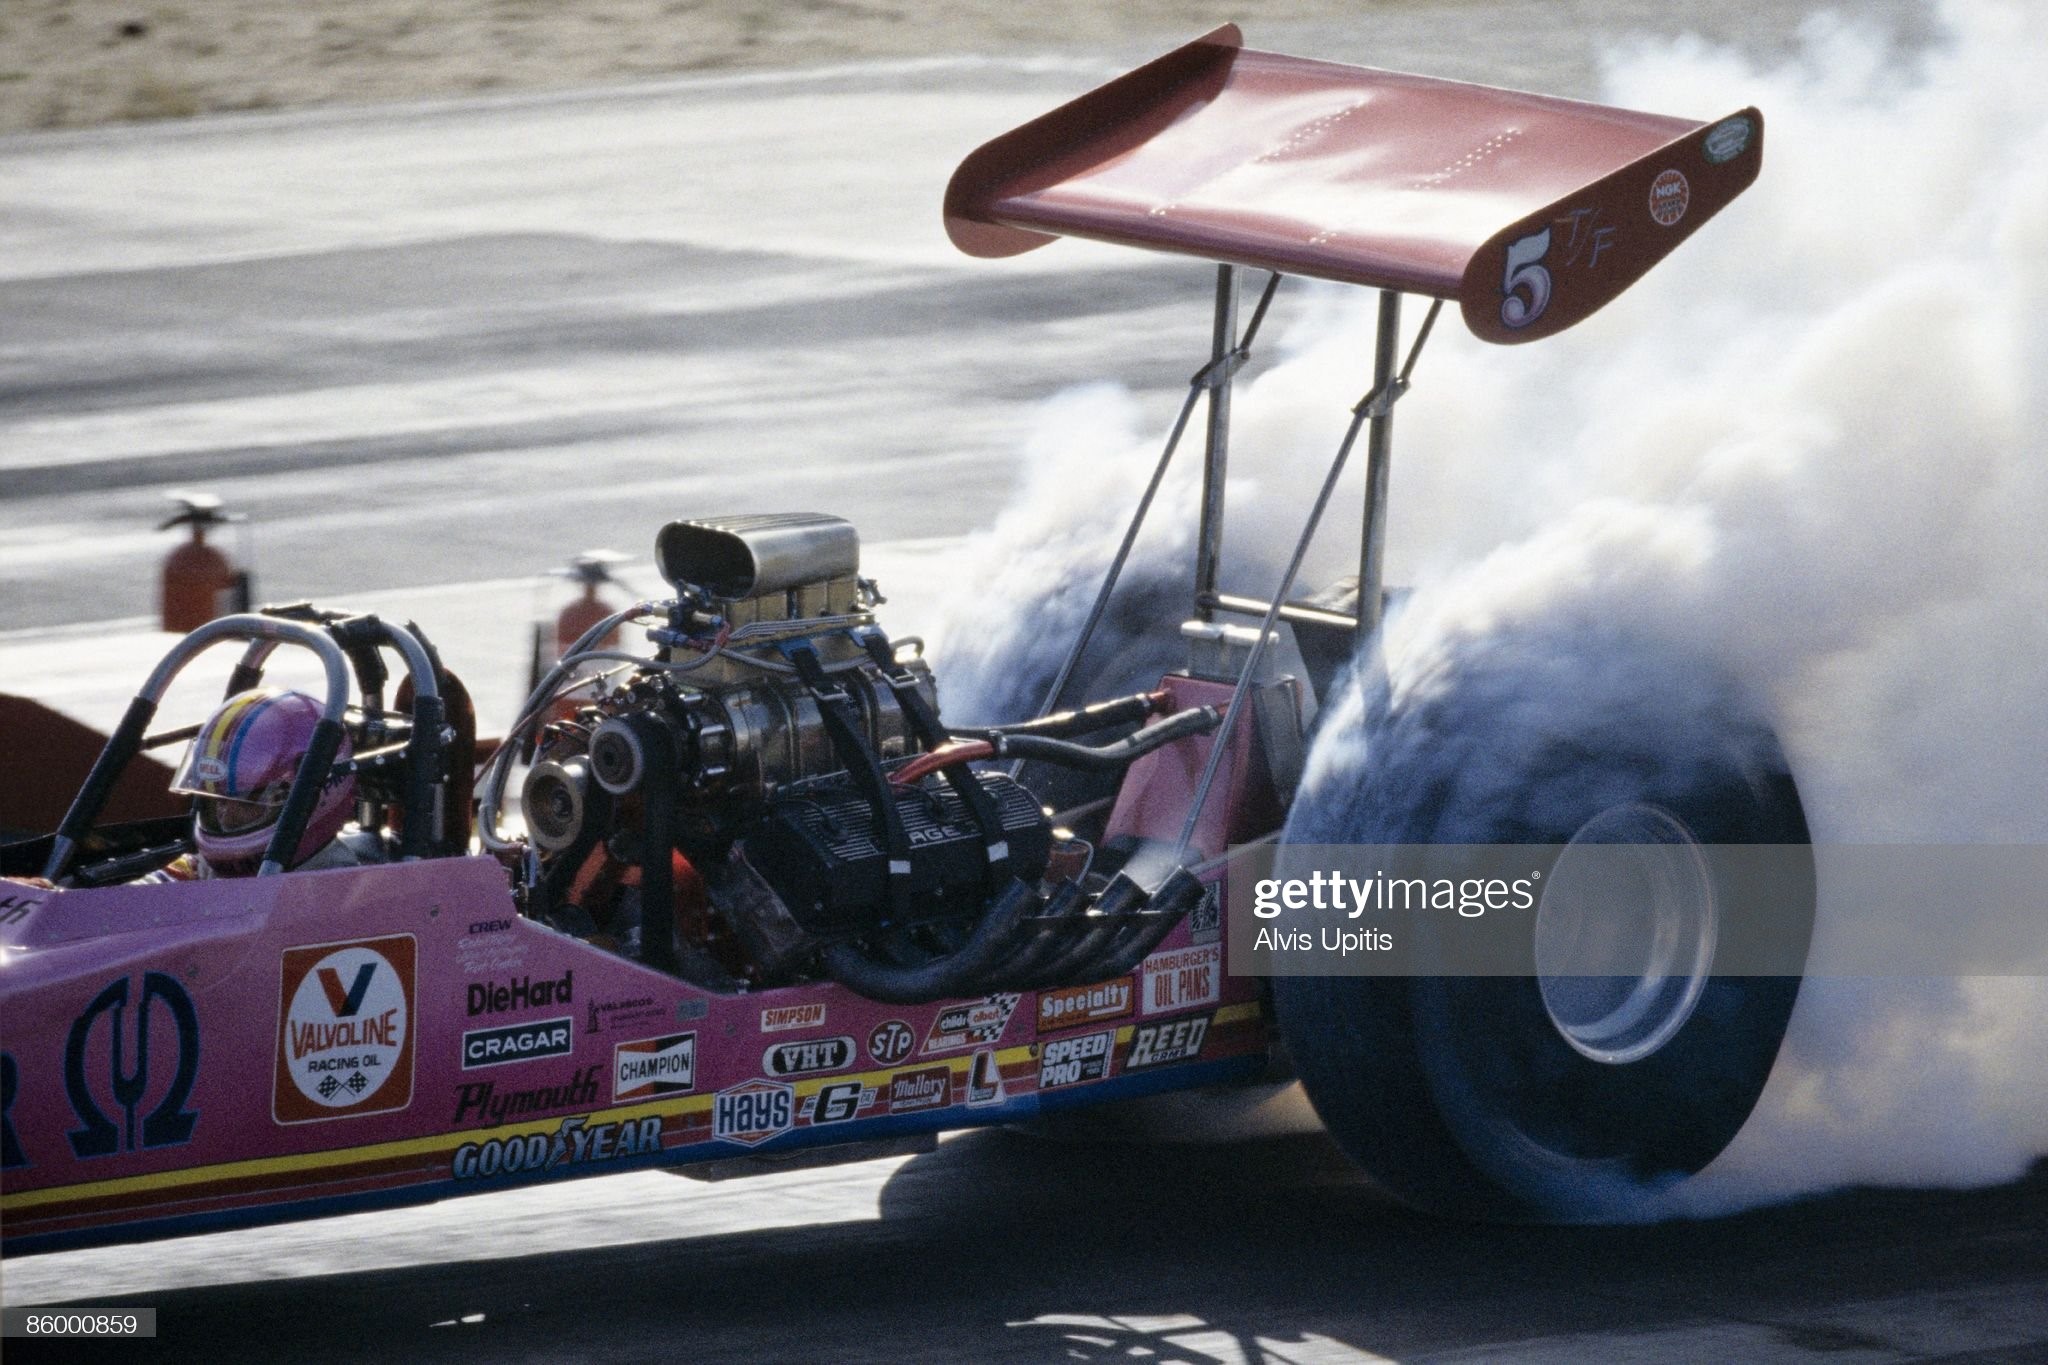 Shirley Muldowney on way to winning Top Fuel Eliminator at the First Annual Quaker State North Star Nationals held on August 22, 1982 at Brainerd International Raceway in Brainerd, Minnesota.